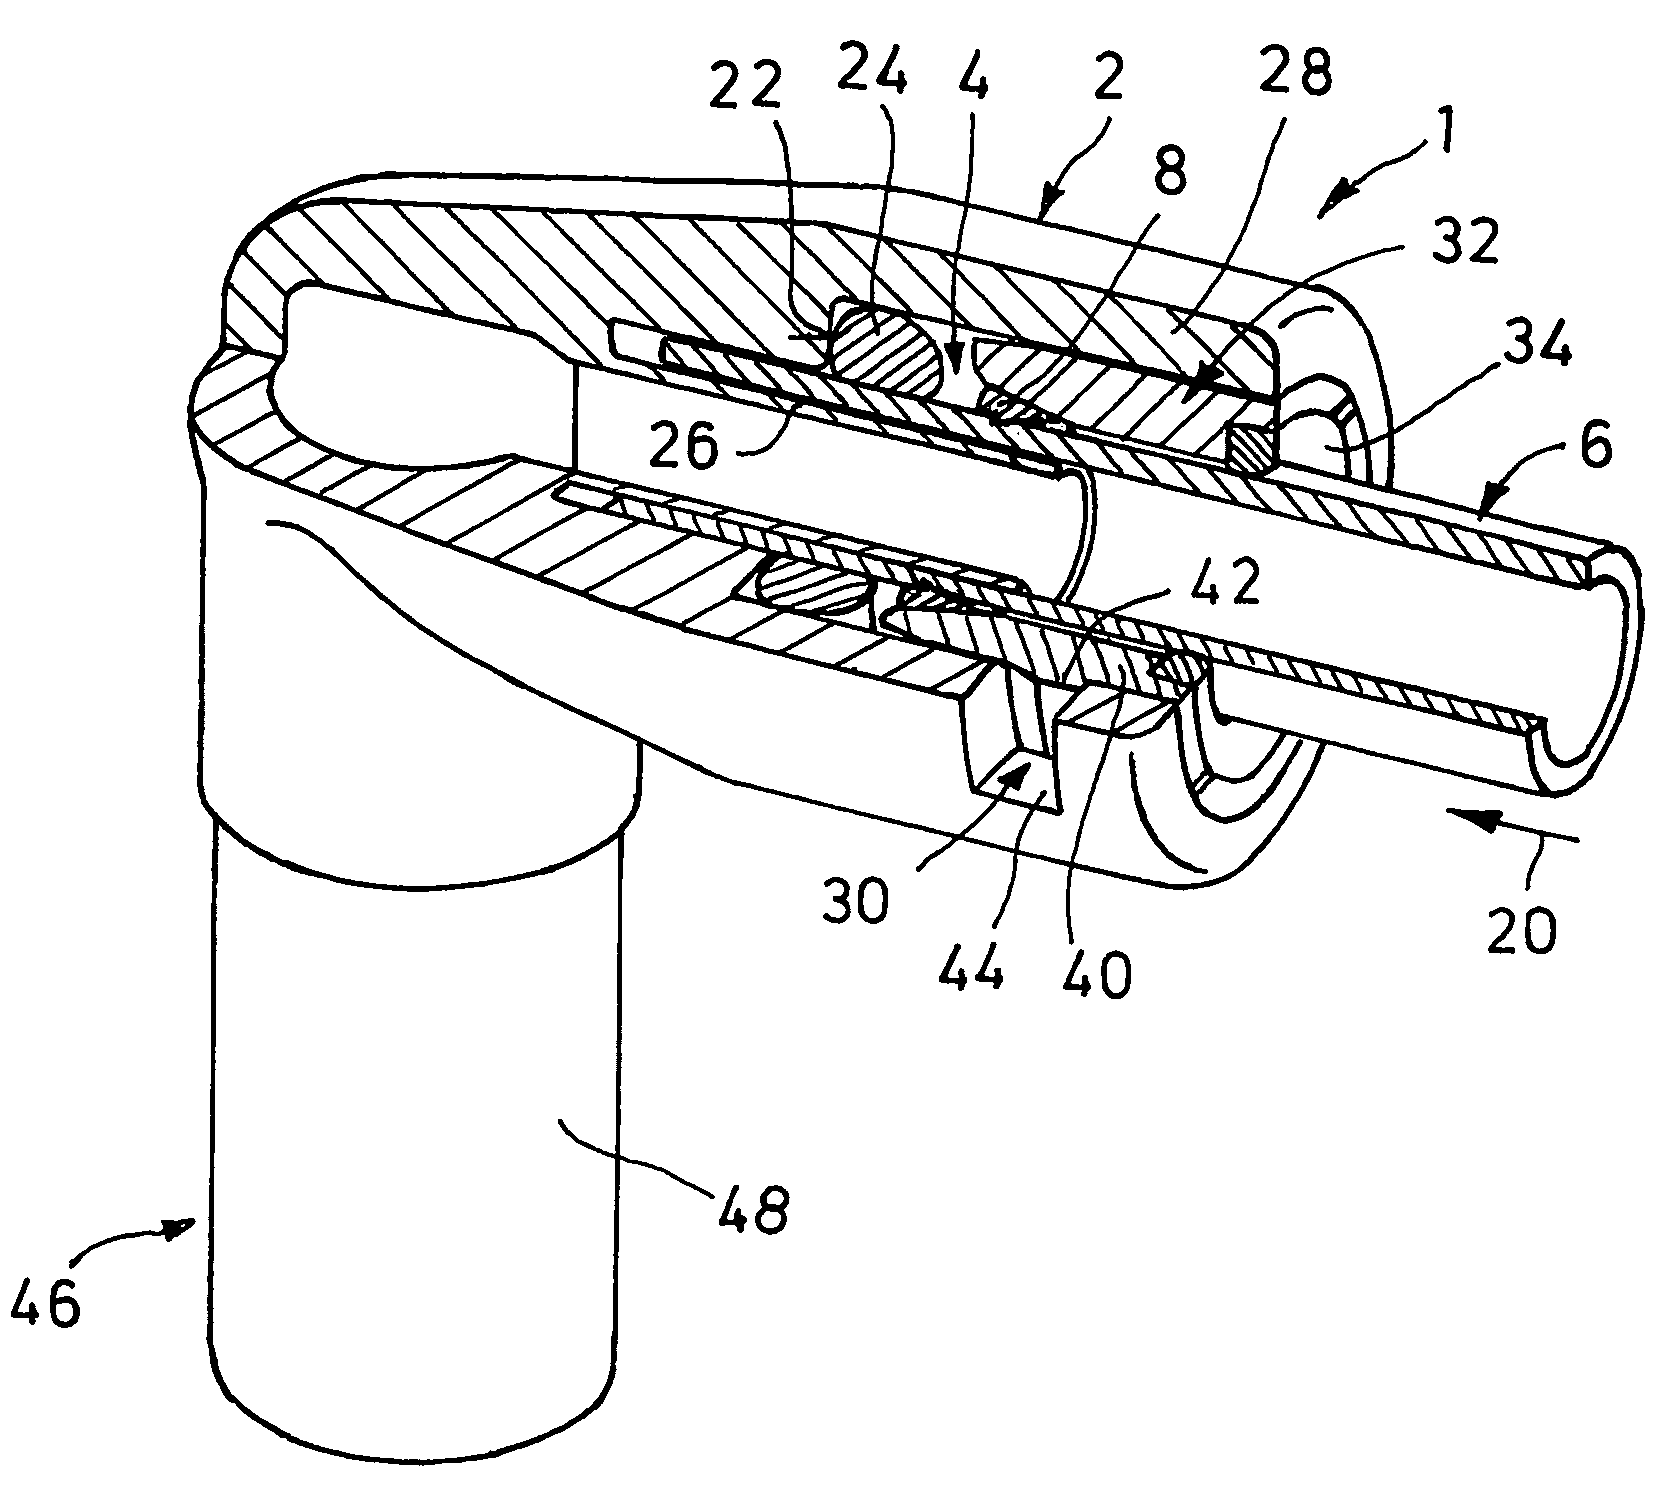 Connector device for pipes